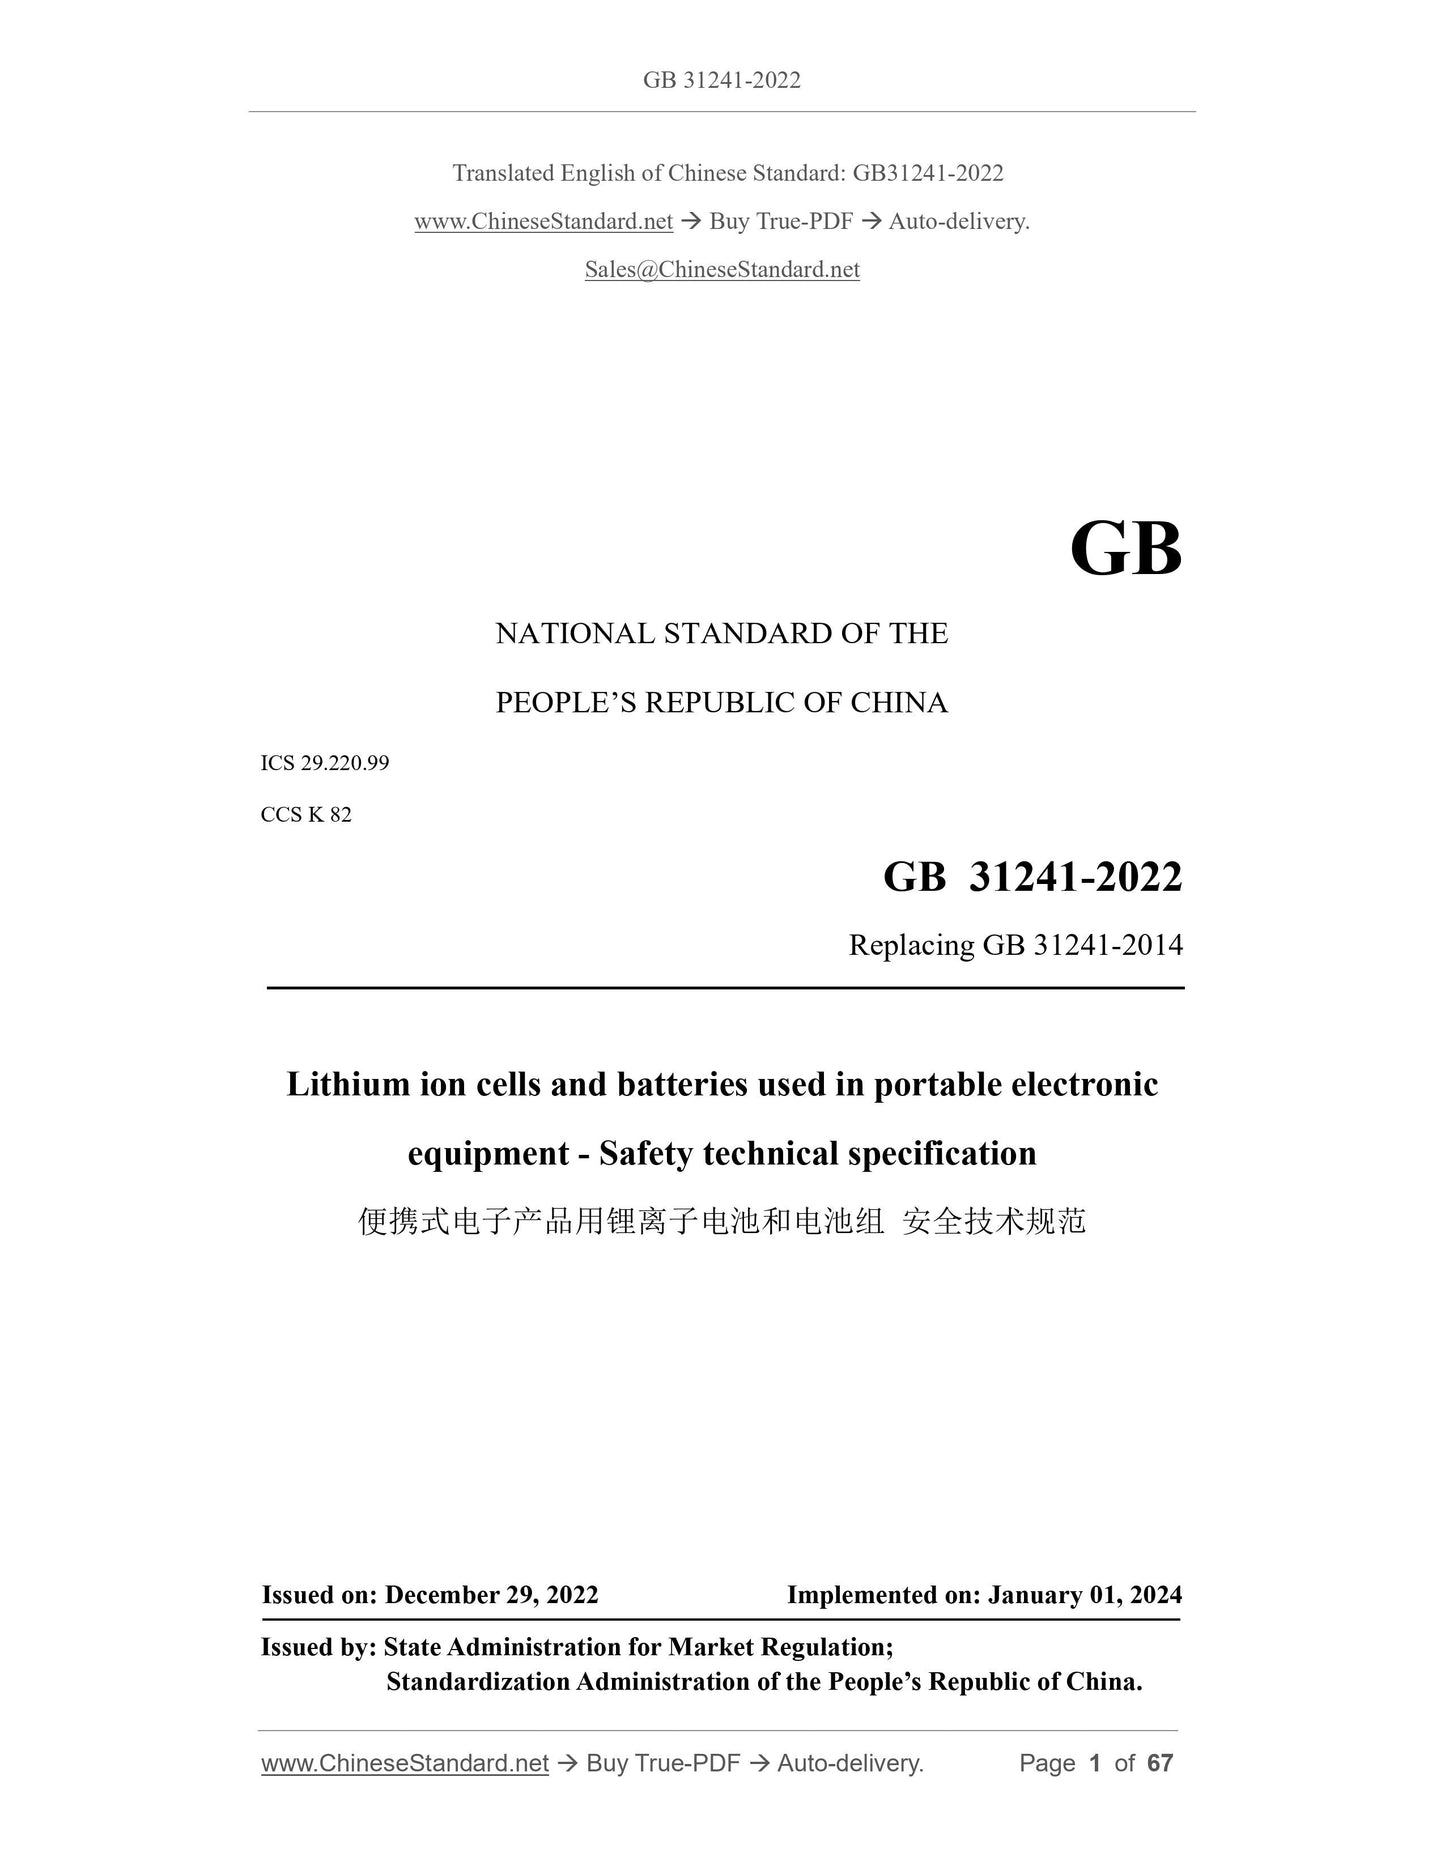 GB 31241-2022 Page 1